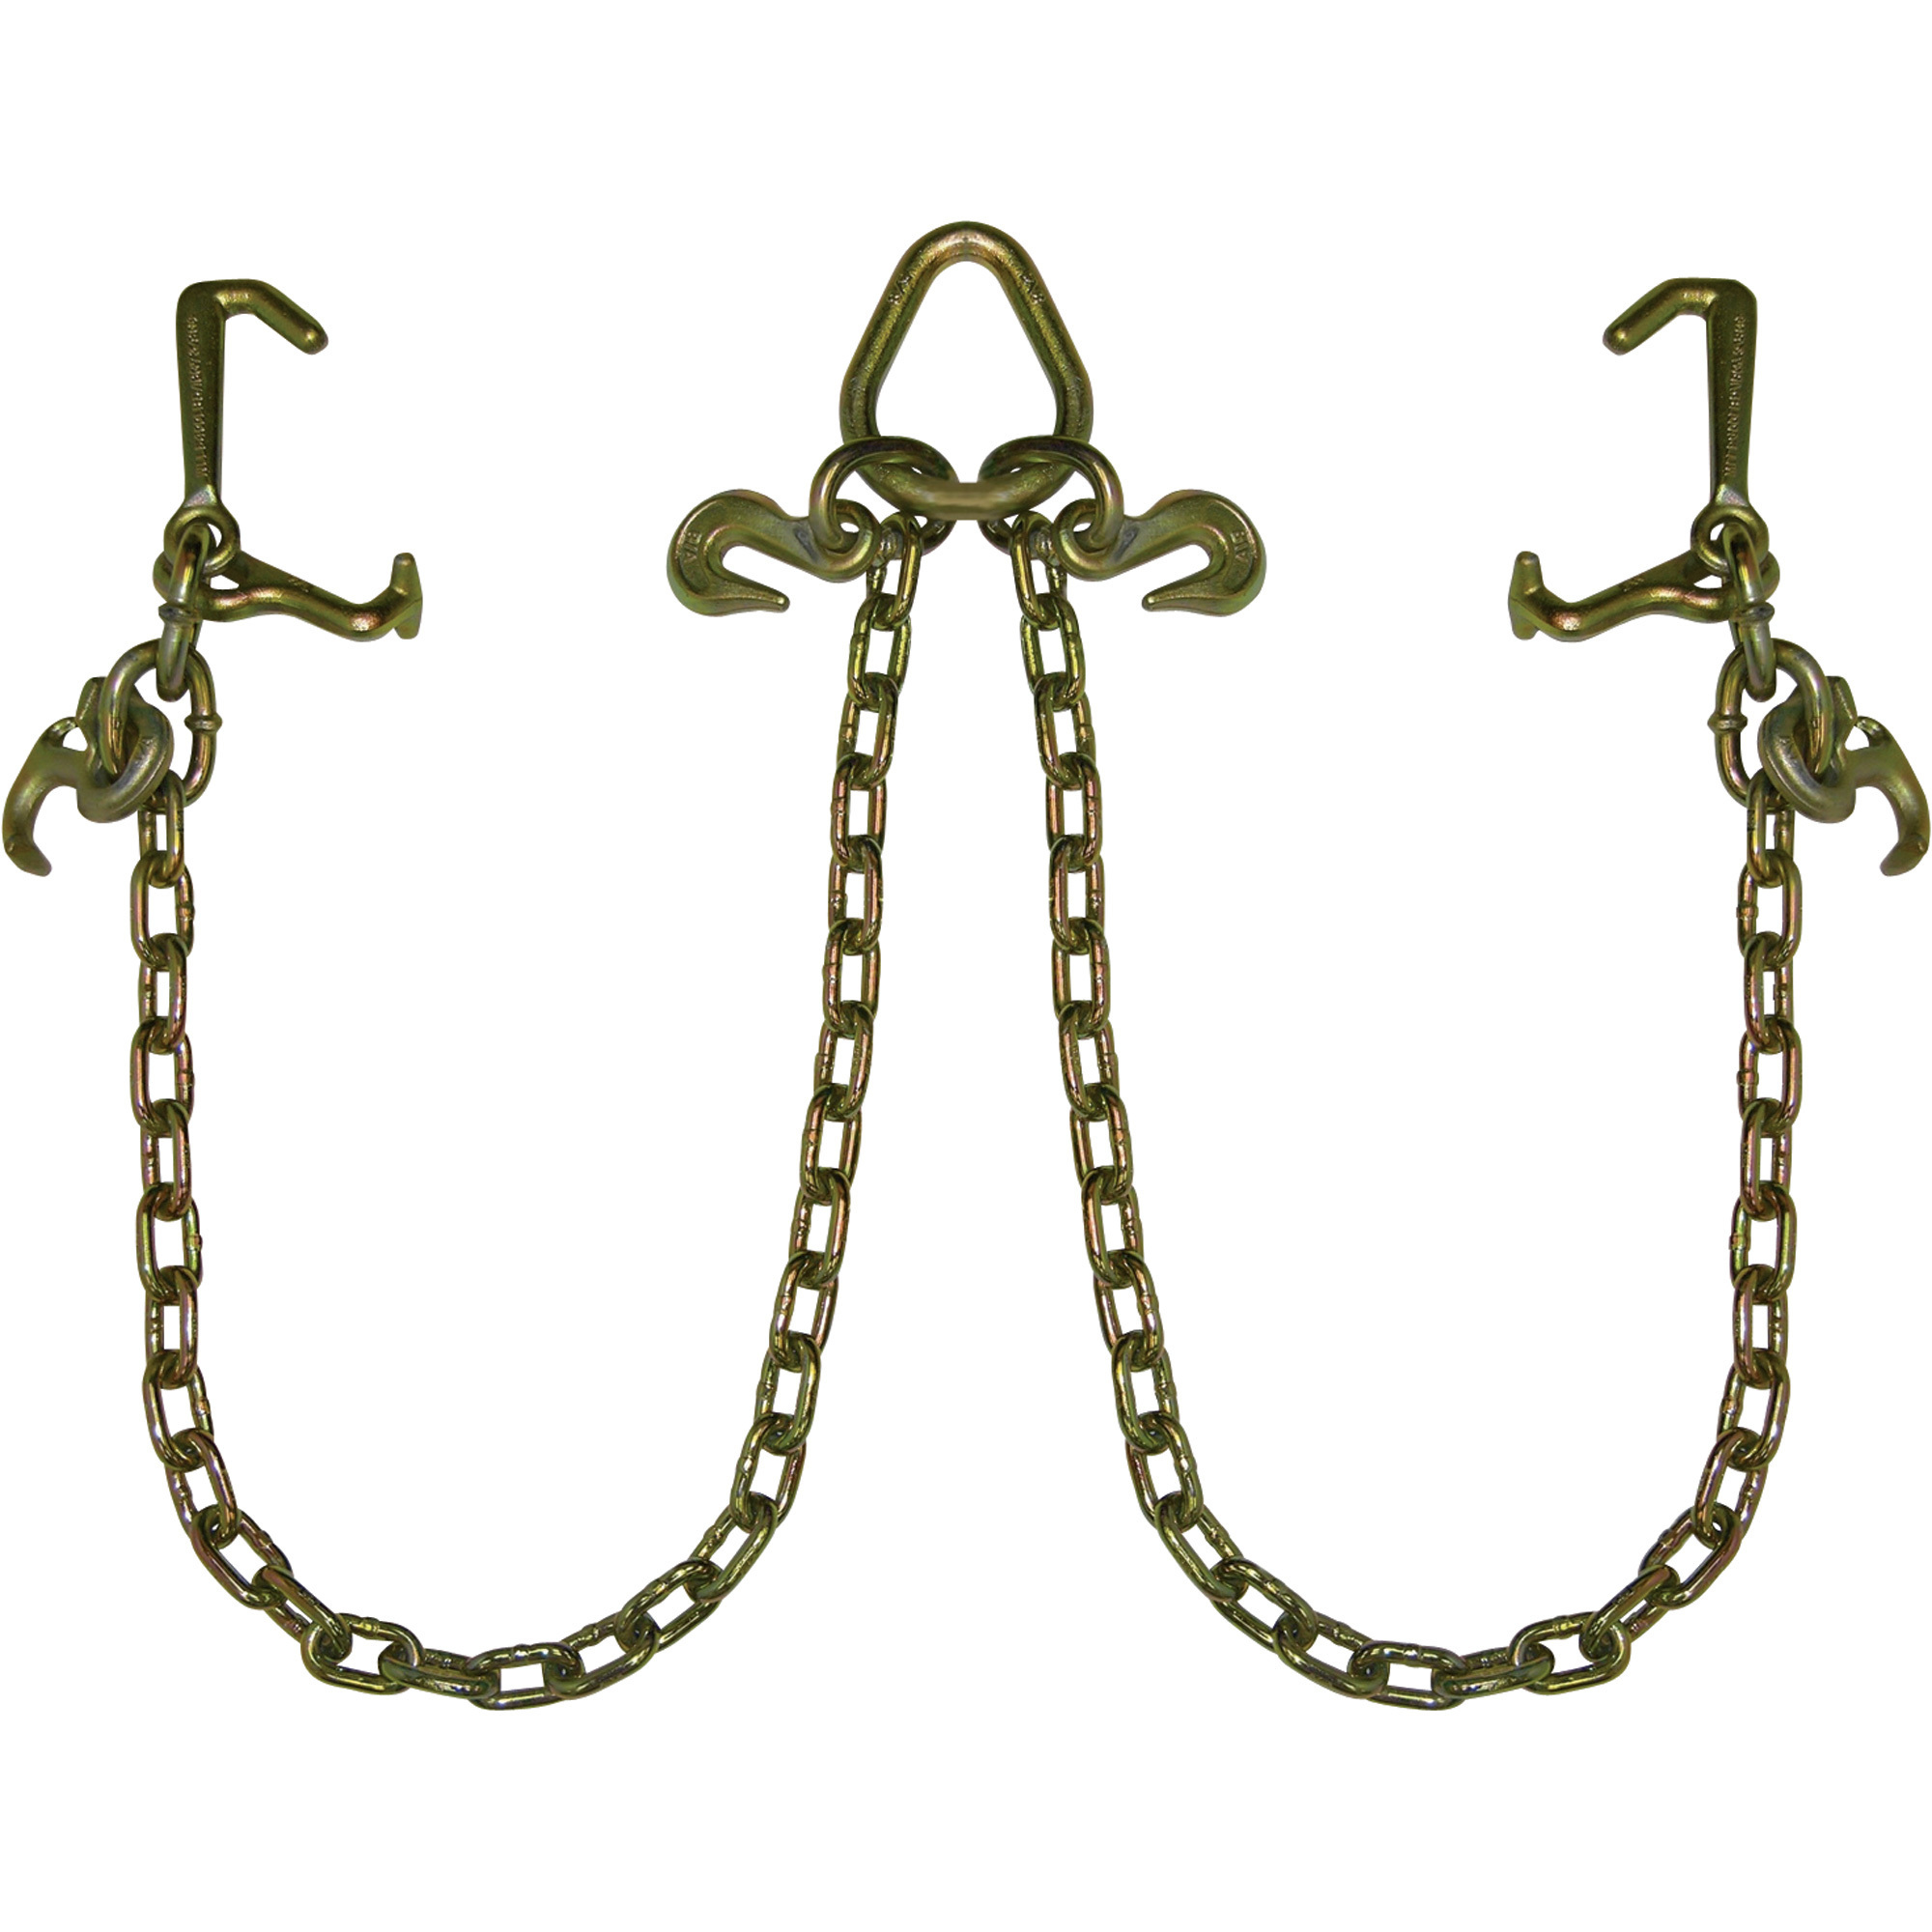 B/A Products V-Chain with Hooks â Mini J-, T- & R-Hooks; 6-ft. Legs, Model N711-8LU6